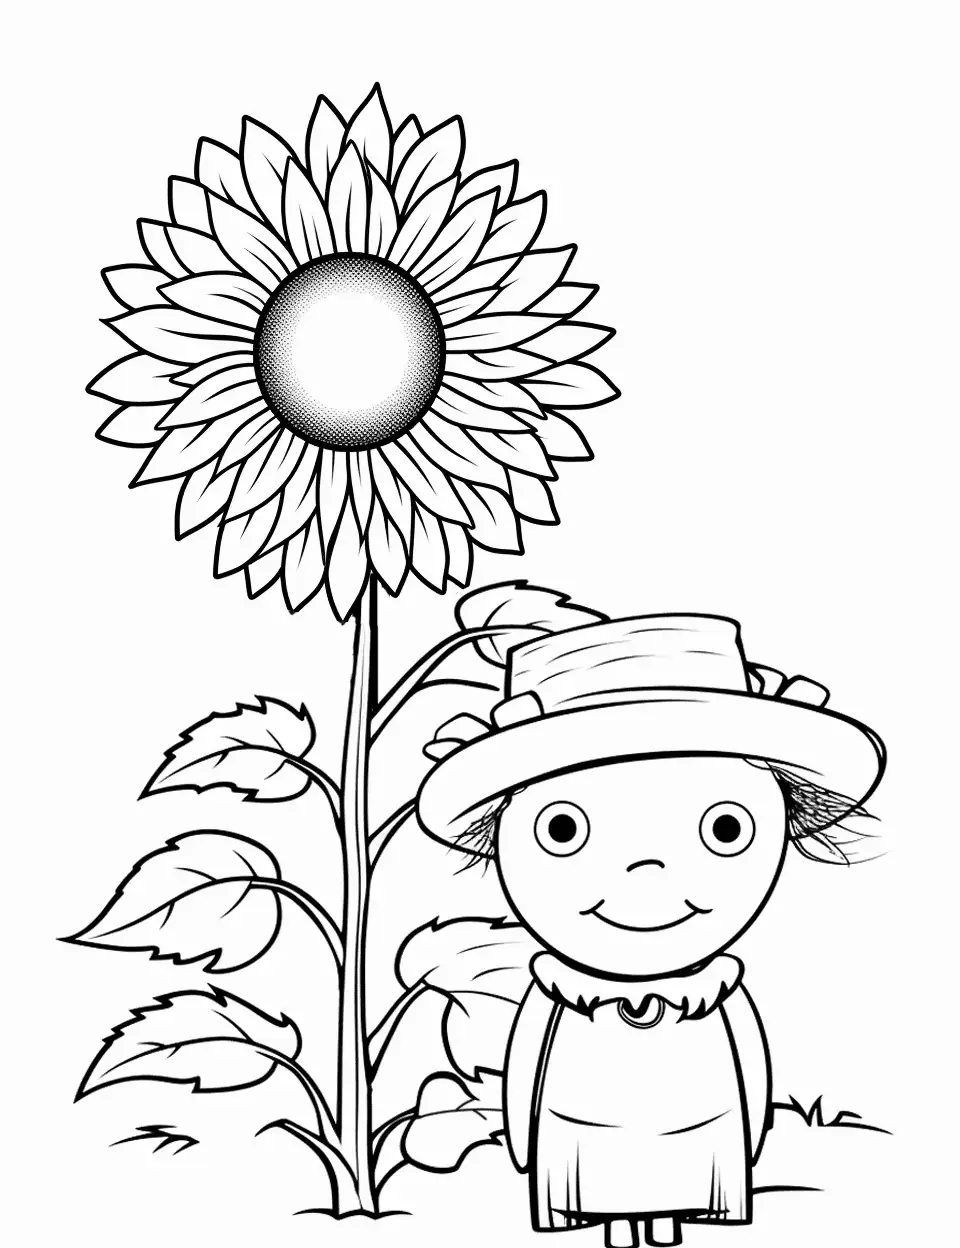 Sunflower and Scarecrow Coloring Page - A sunflower next to a friendly scarecrow.